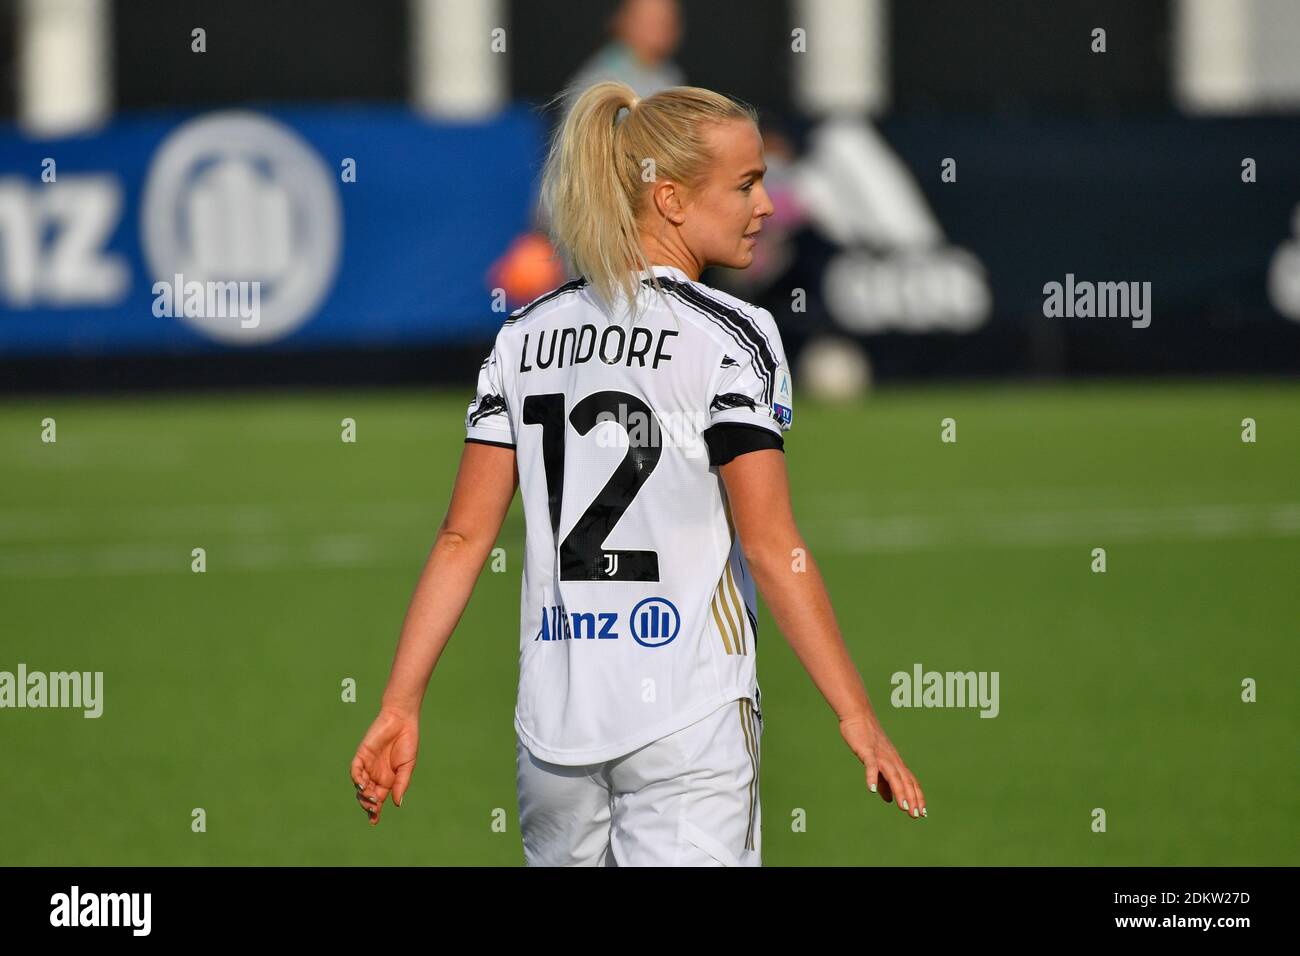 Torino, Italy. 12th, December 2020. Matilde Lundorf (12) of Juventus seen  in the Serie A Femminile match between Juventus and Roma Femminile at the  Juventus Training Ground in Torino. (Photo credit: Gonzales